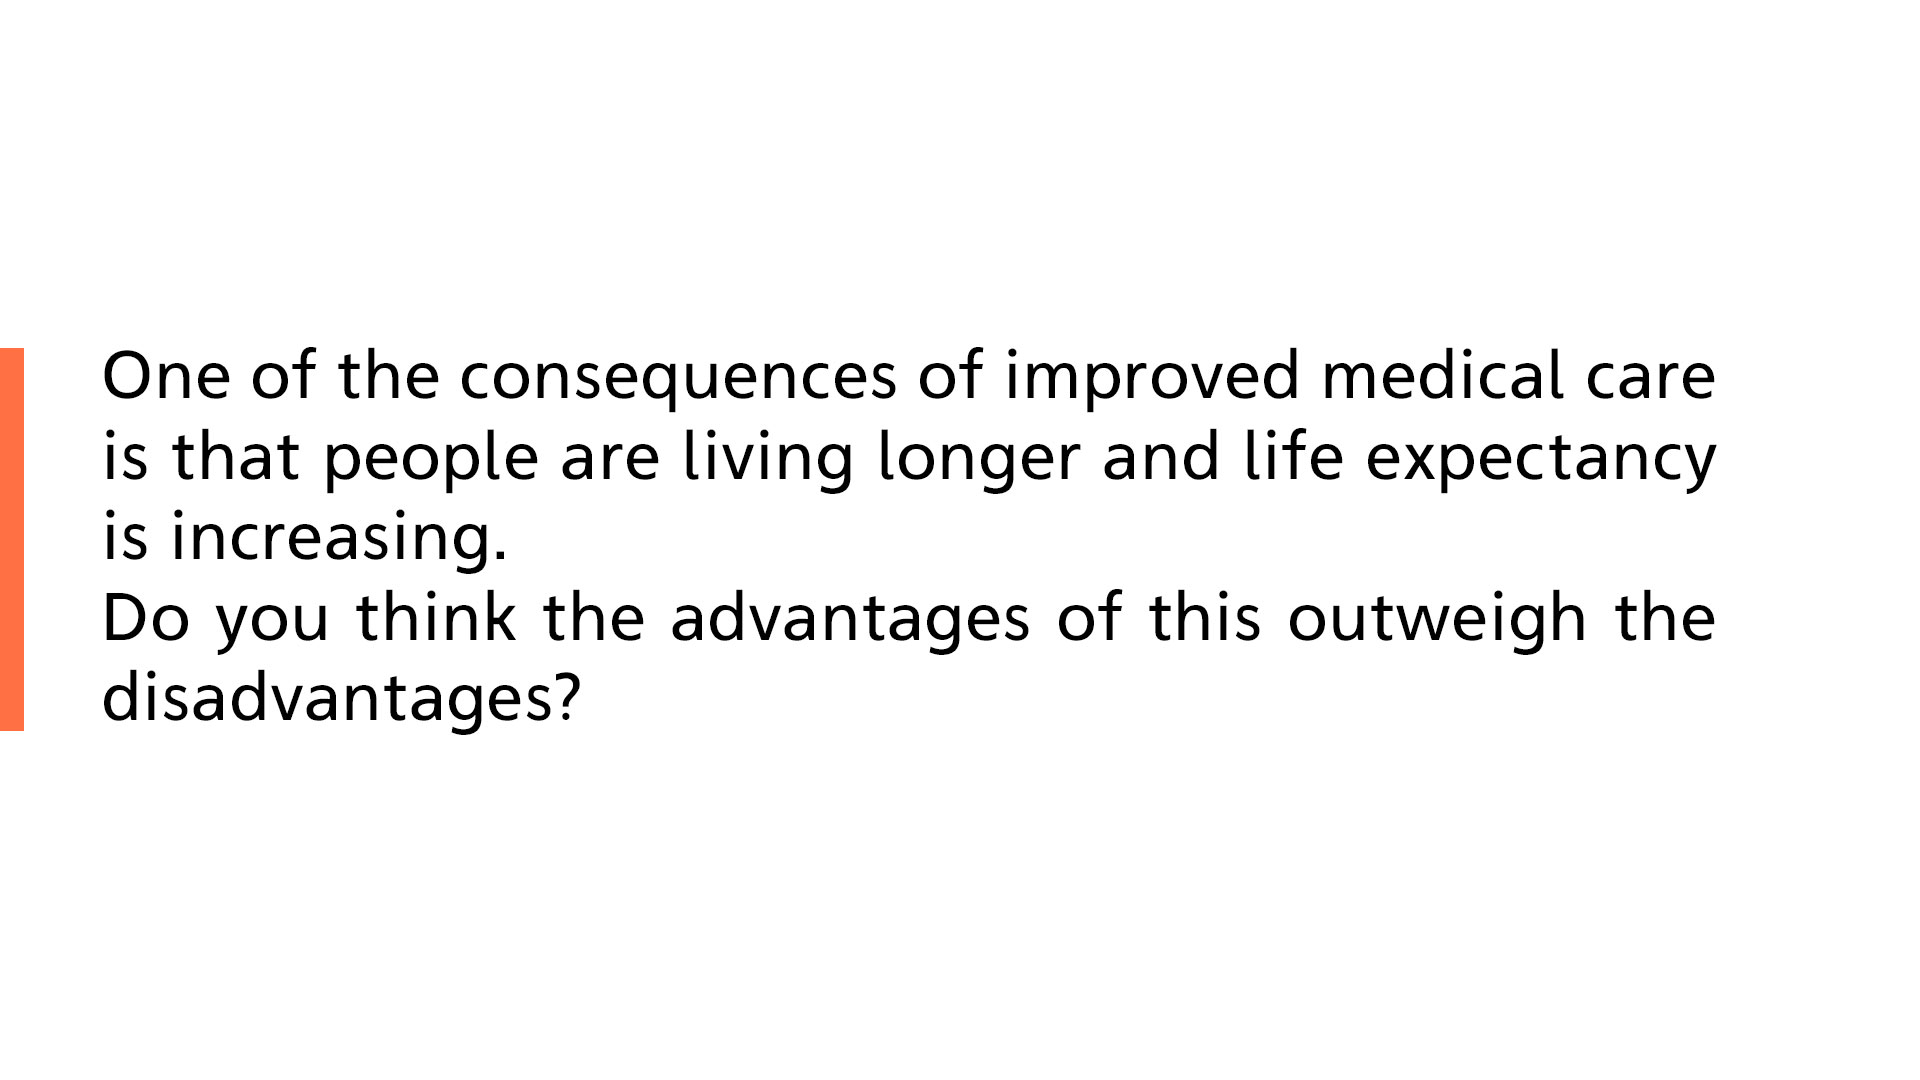 Consequence of improved medical care is people are living longer